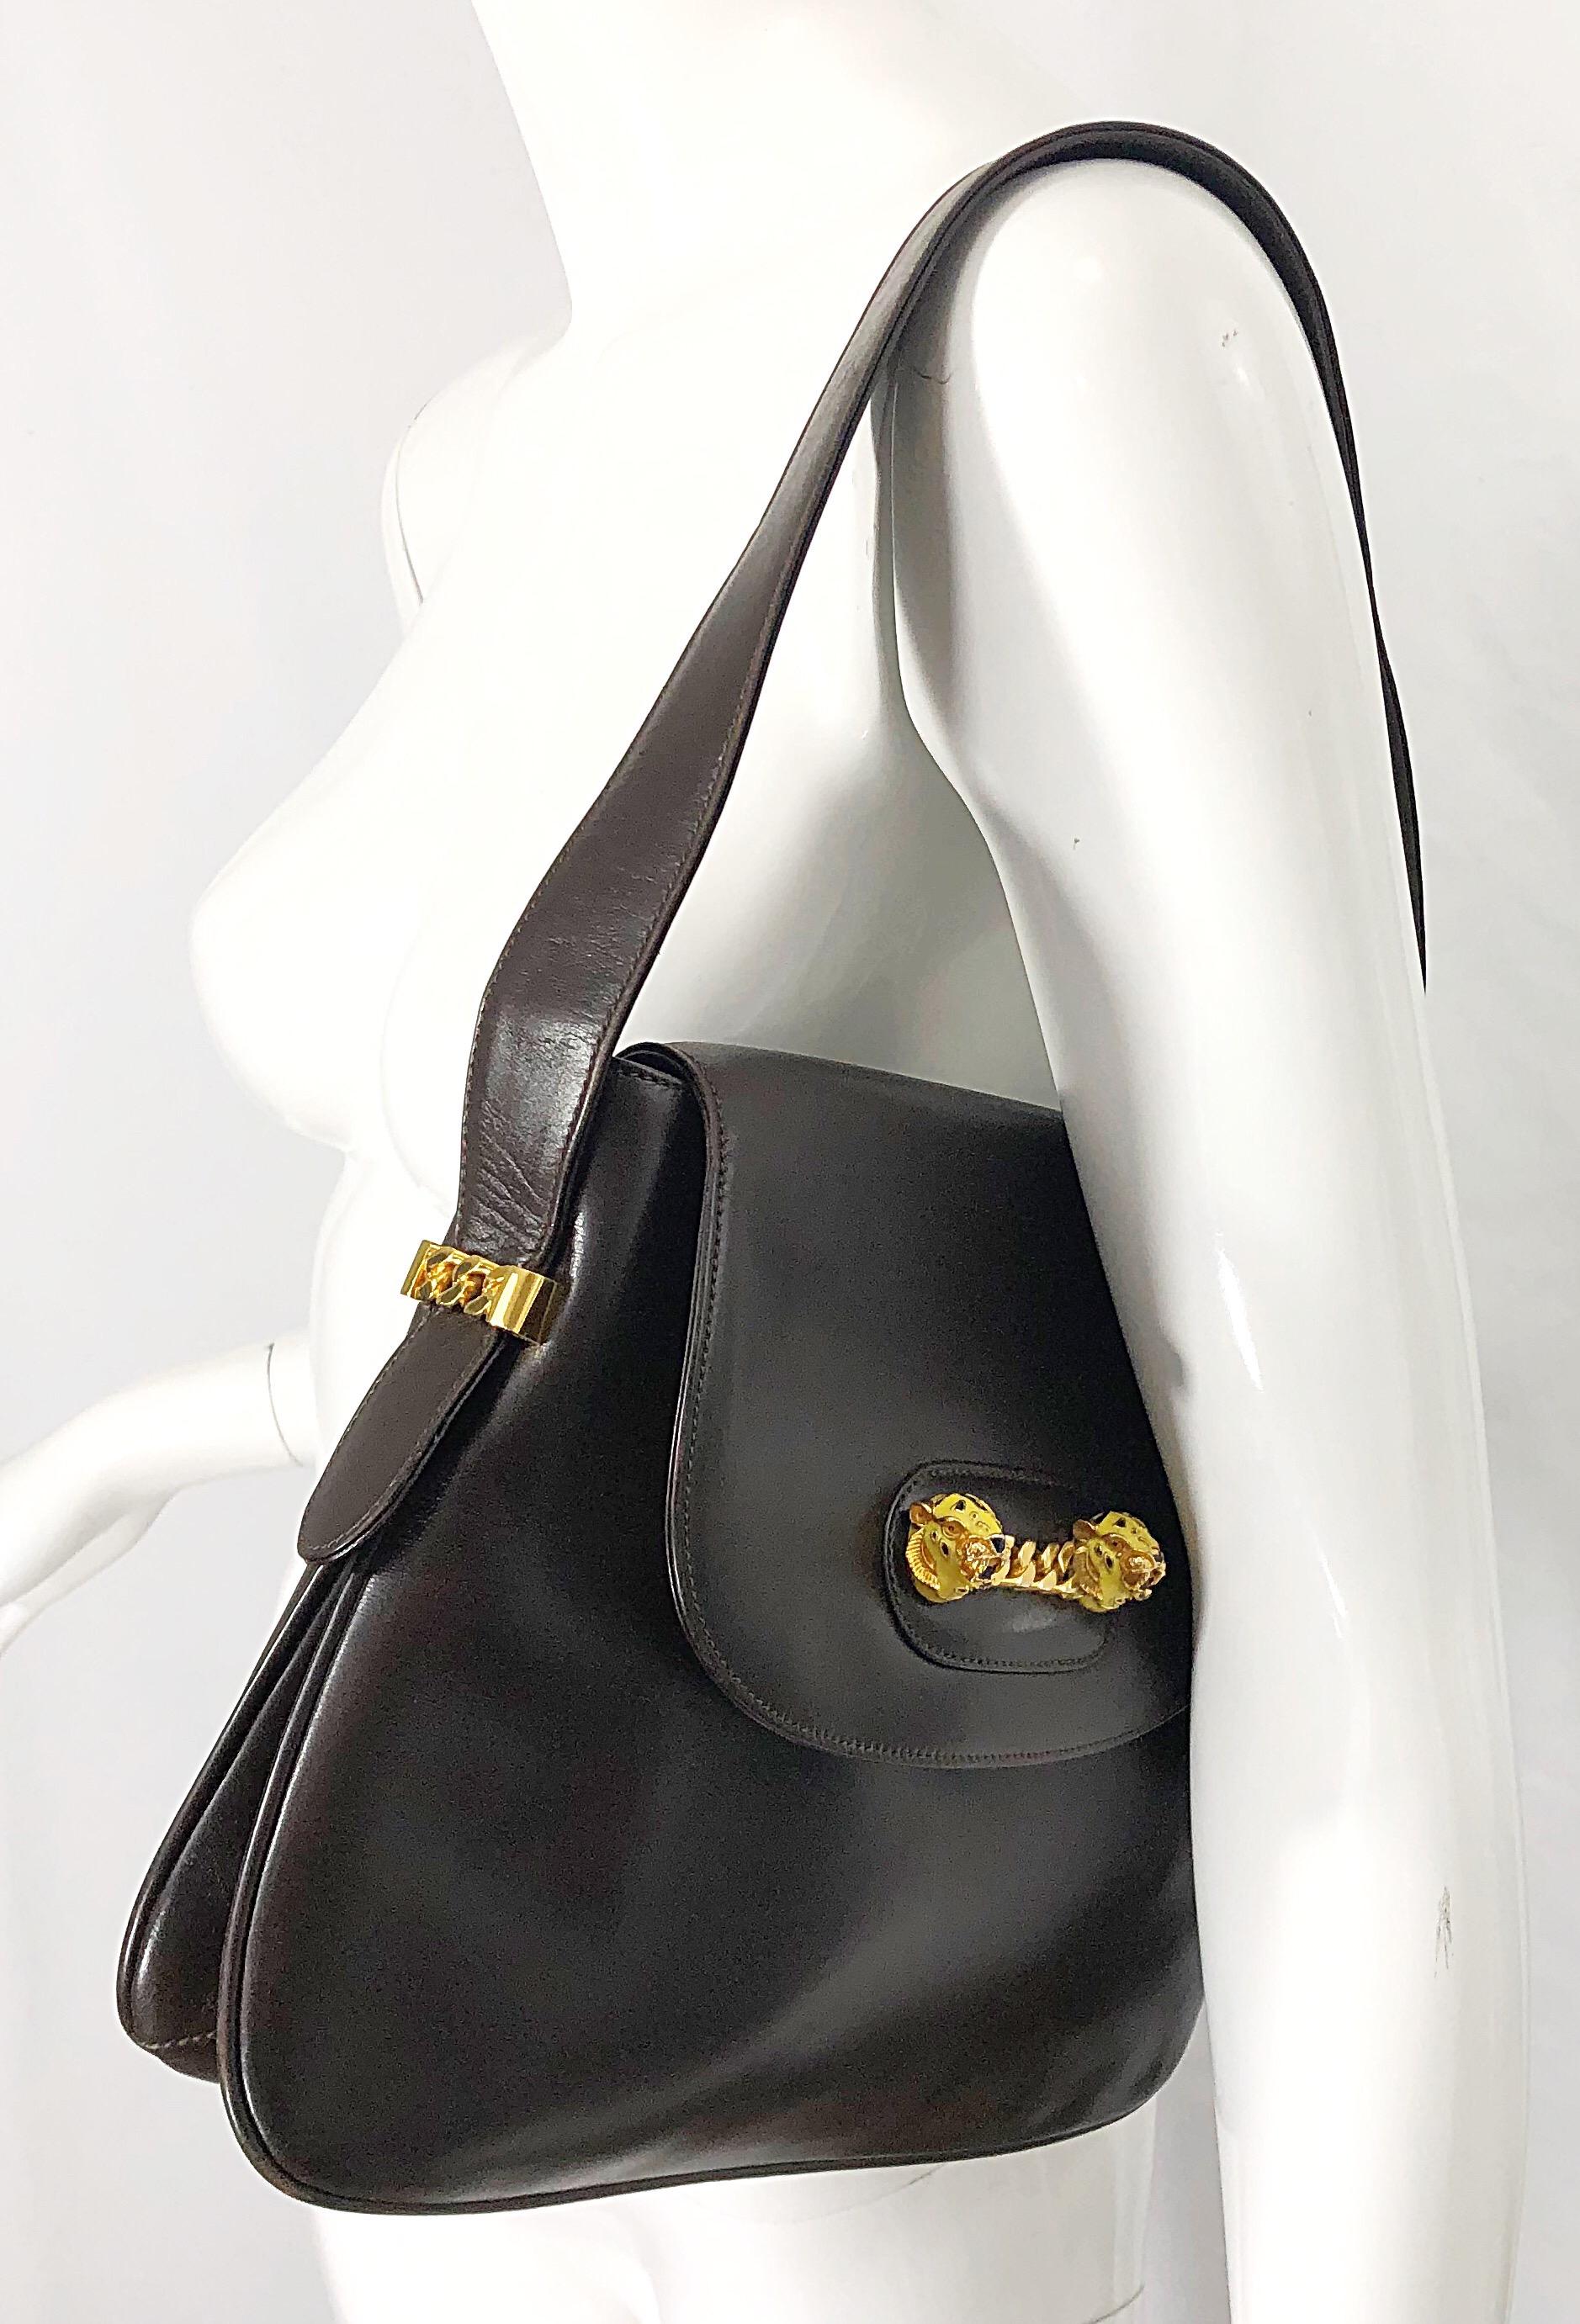 Rare and equally as chic 70s GUCCI chocolate brown leather shoulder bag ! Features the perfect brown color that goes with anything, anytime of year. Flap closure with pockets inside. Gold chain details with yellow painted enamel tigers on the front